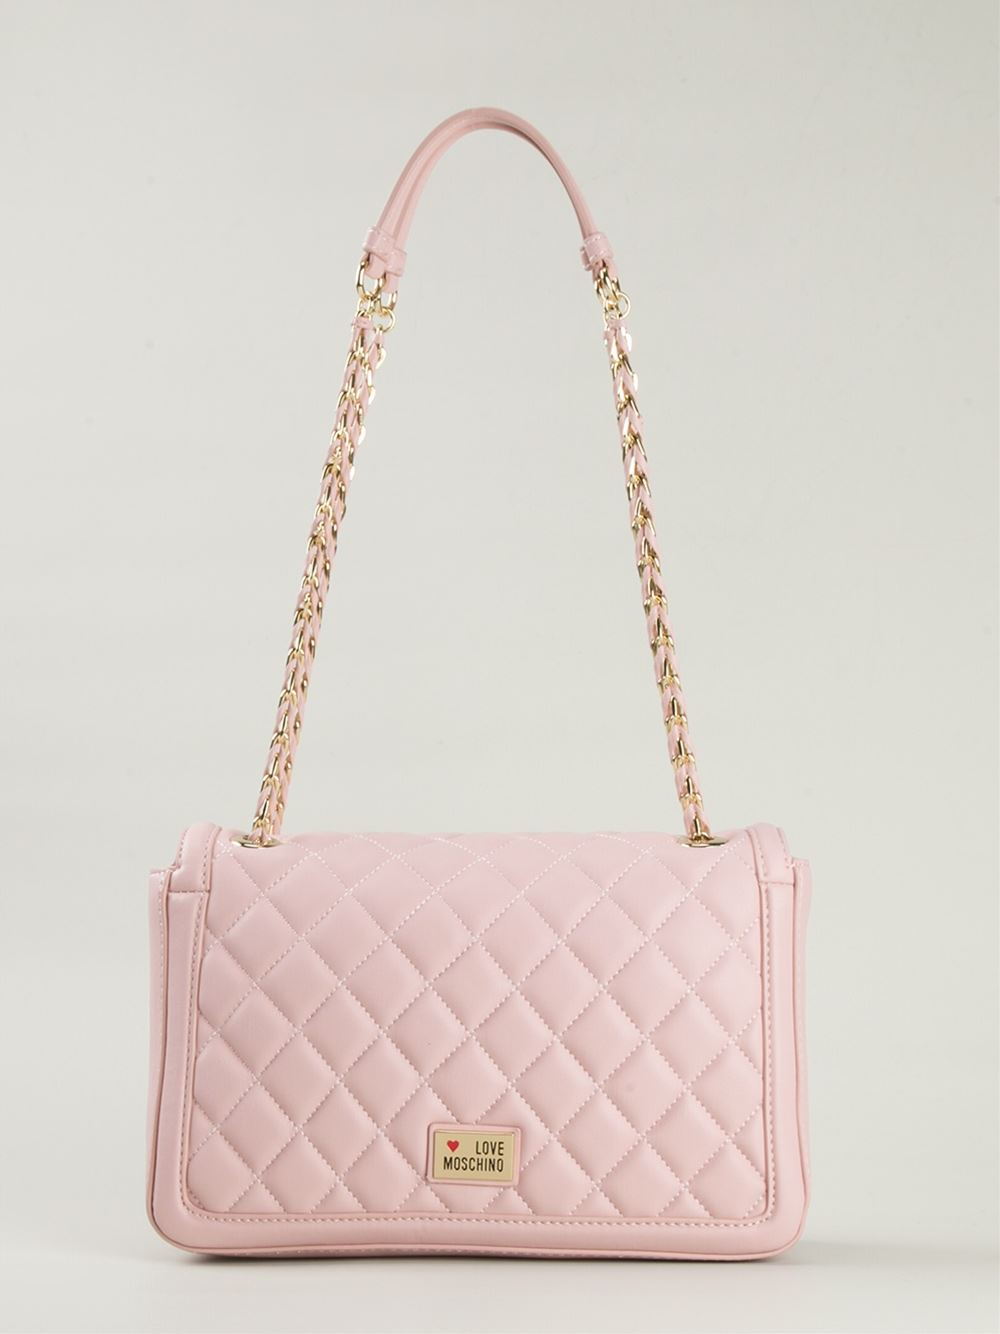 Love moschino Quilted-Leather Shoulder Bag in Pink | Lyst